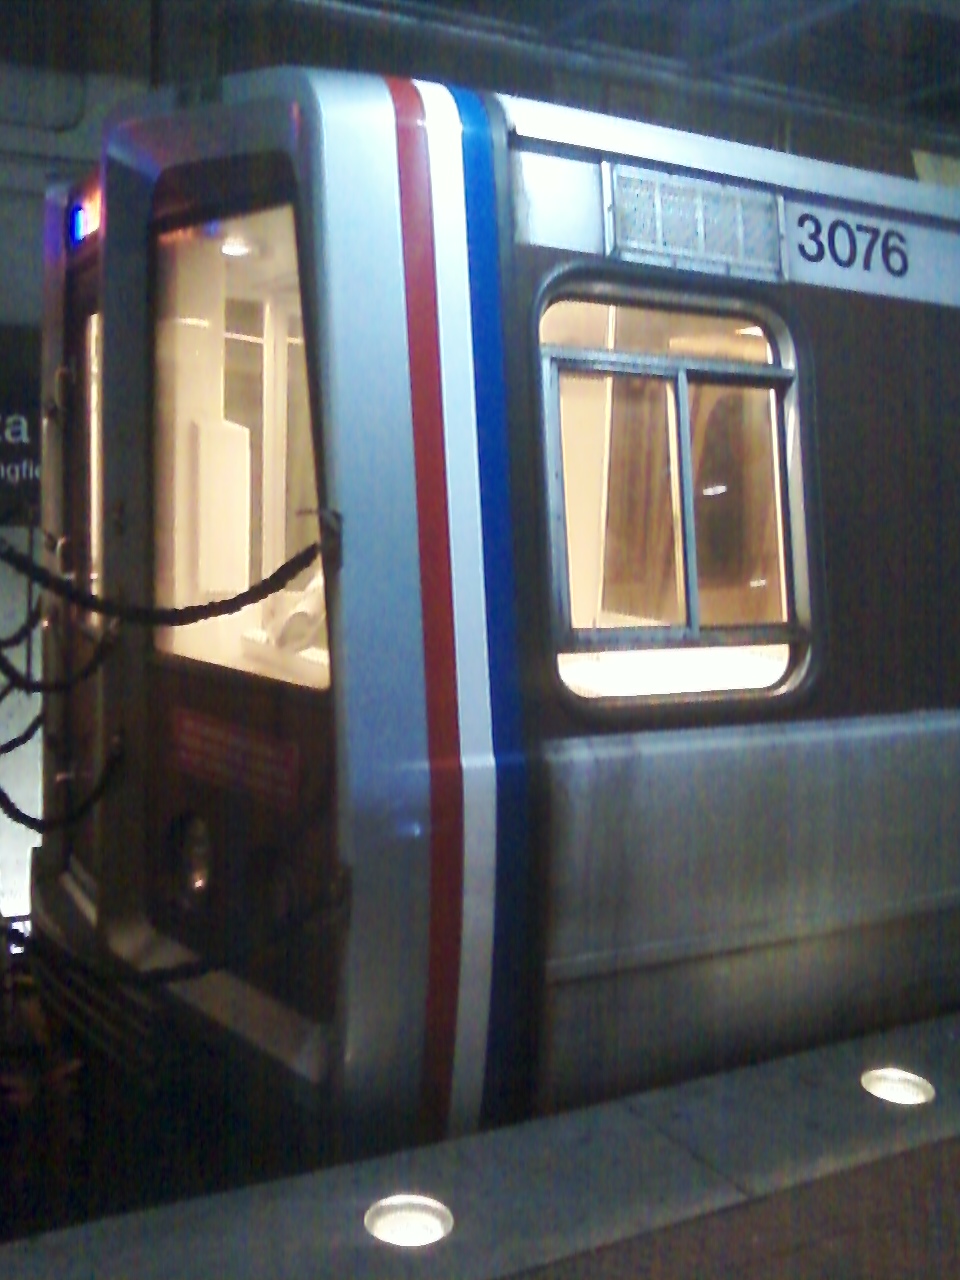 WMATA/DC Metro 'private section' of a 3000-series car from the
exterior. The window nearest the platform is where passengers may sit in a
semi-isolated seat from the rest of the car, when the motorman is not
operating the train from the given cab. For further details, please visit
www.wirelessnotes.org.